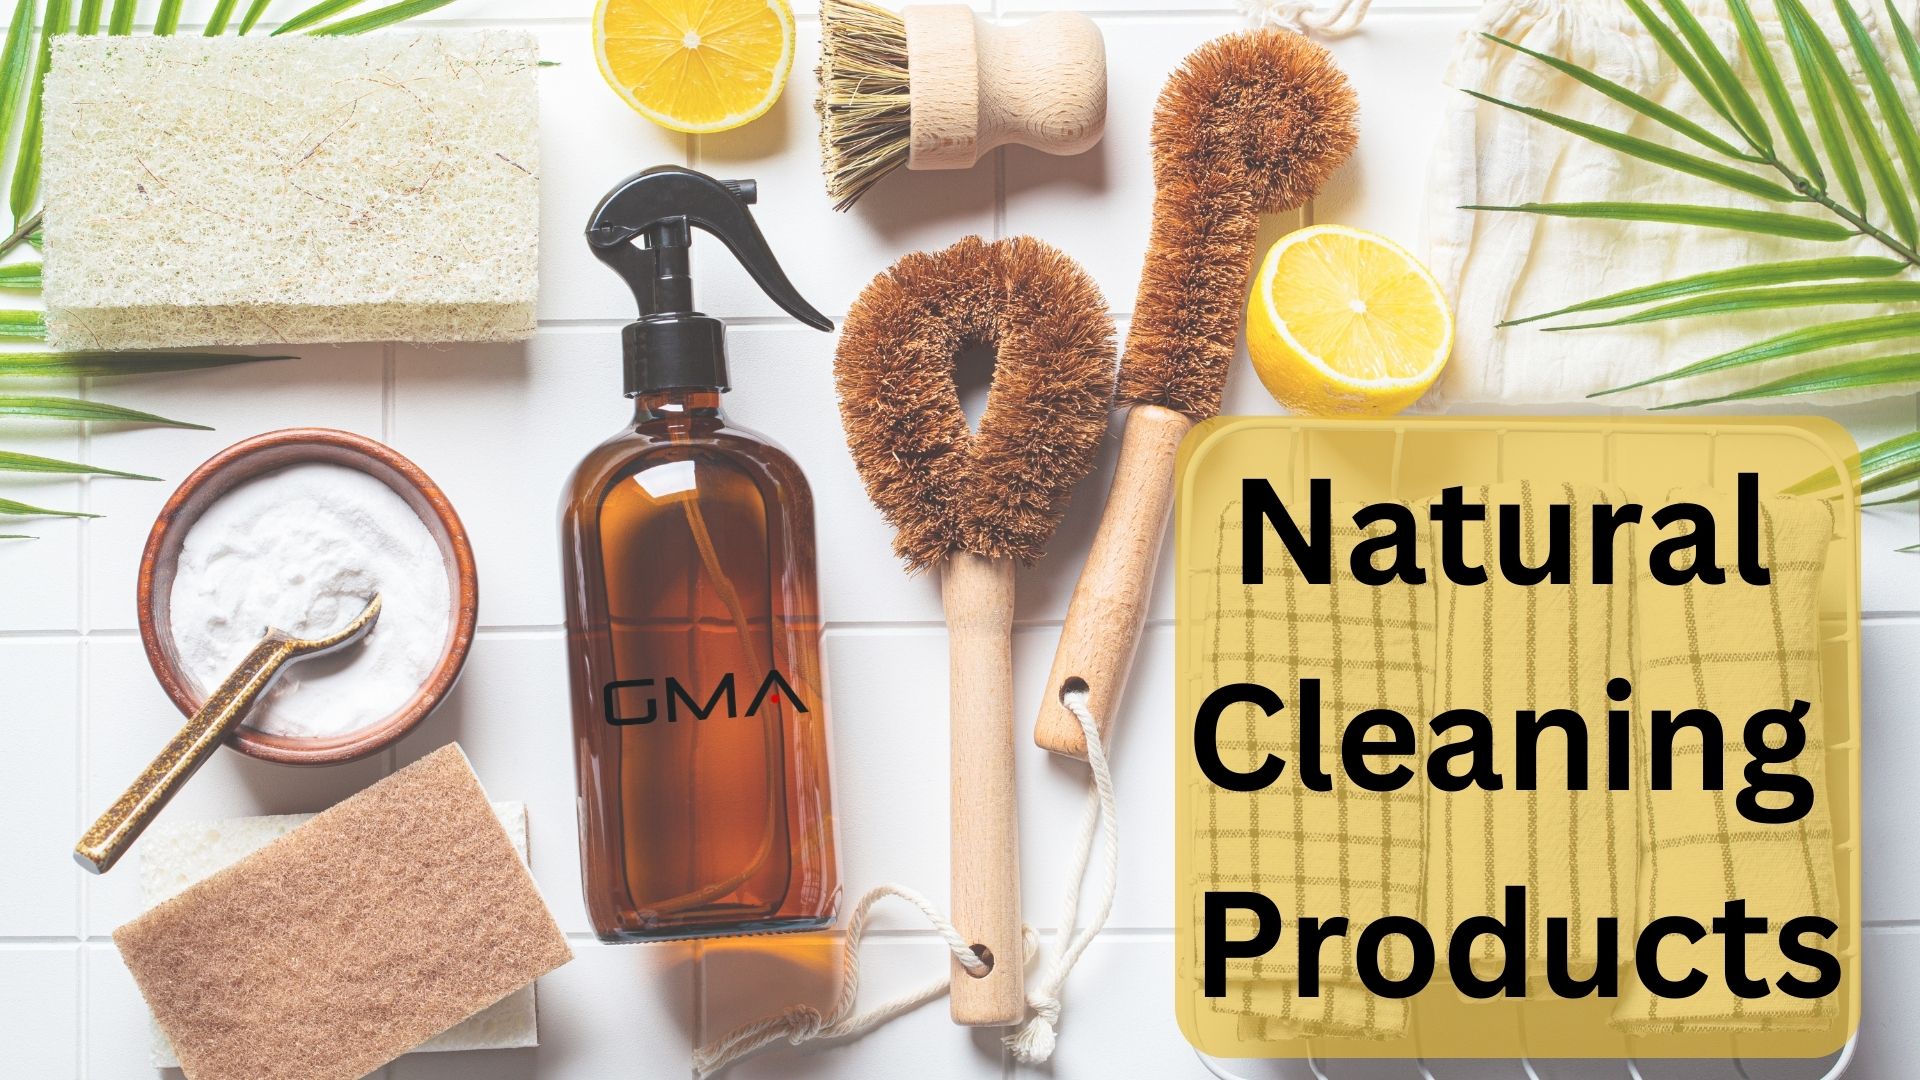 Natural Cleaning Products a Huge Demand in China